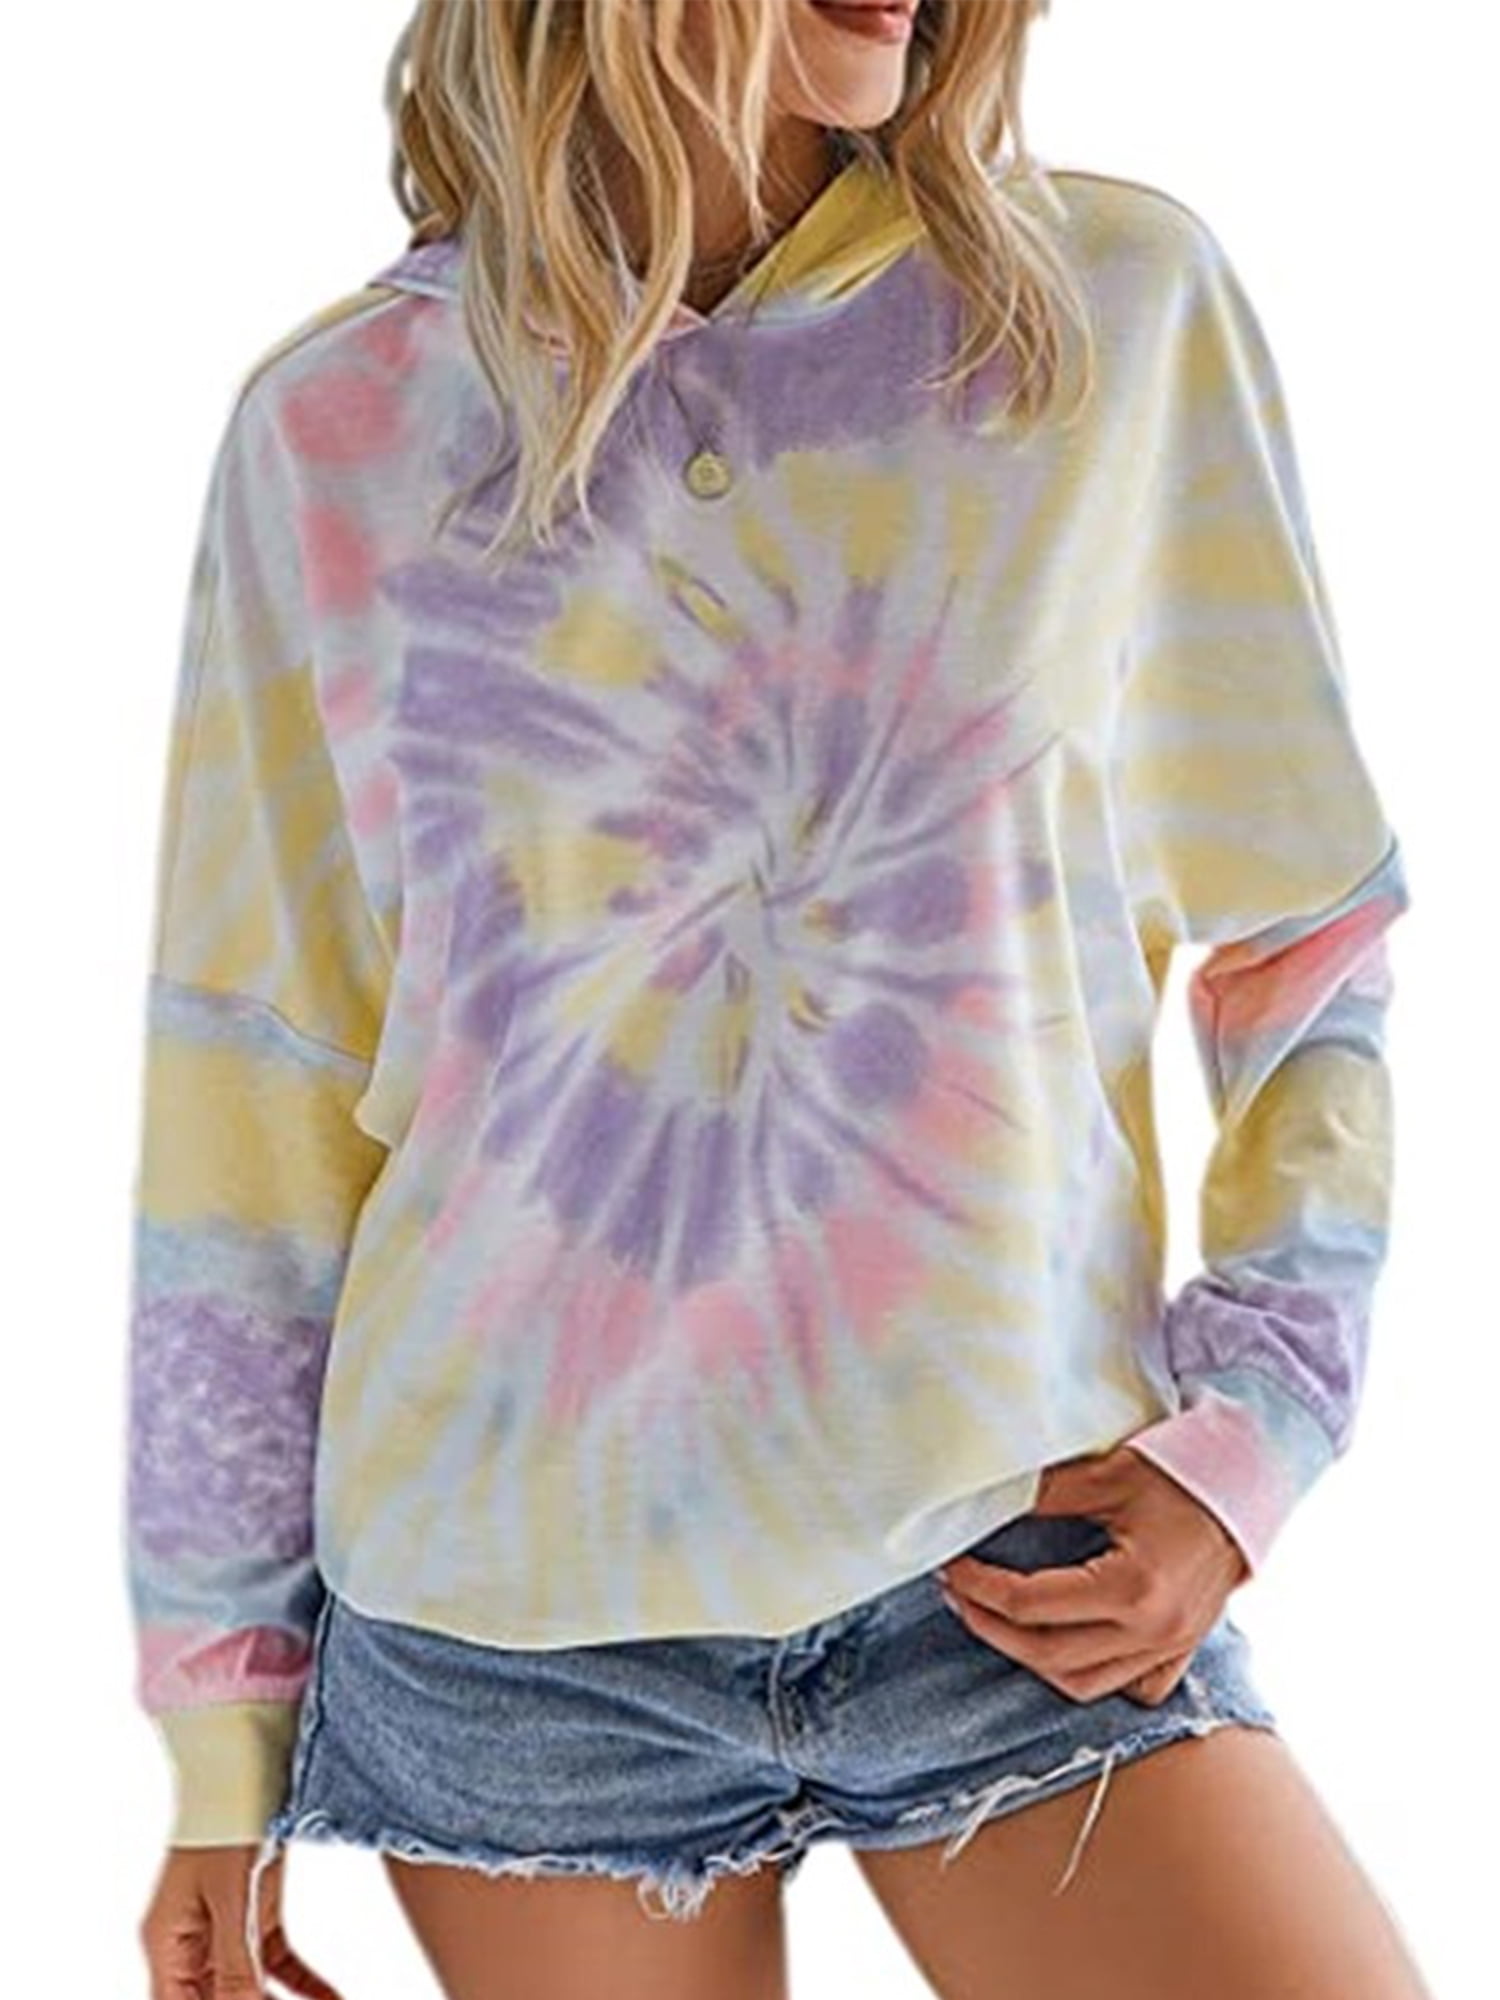 Women Crewneck Sweatshirt Long Sleeve Trendy Ombre Tie Dye Pullover Tops Basic Casual Loose Fit Comfy Sweater Blouses 